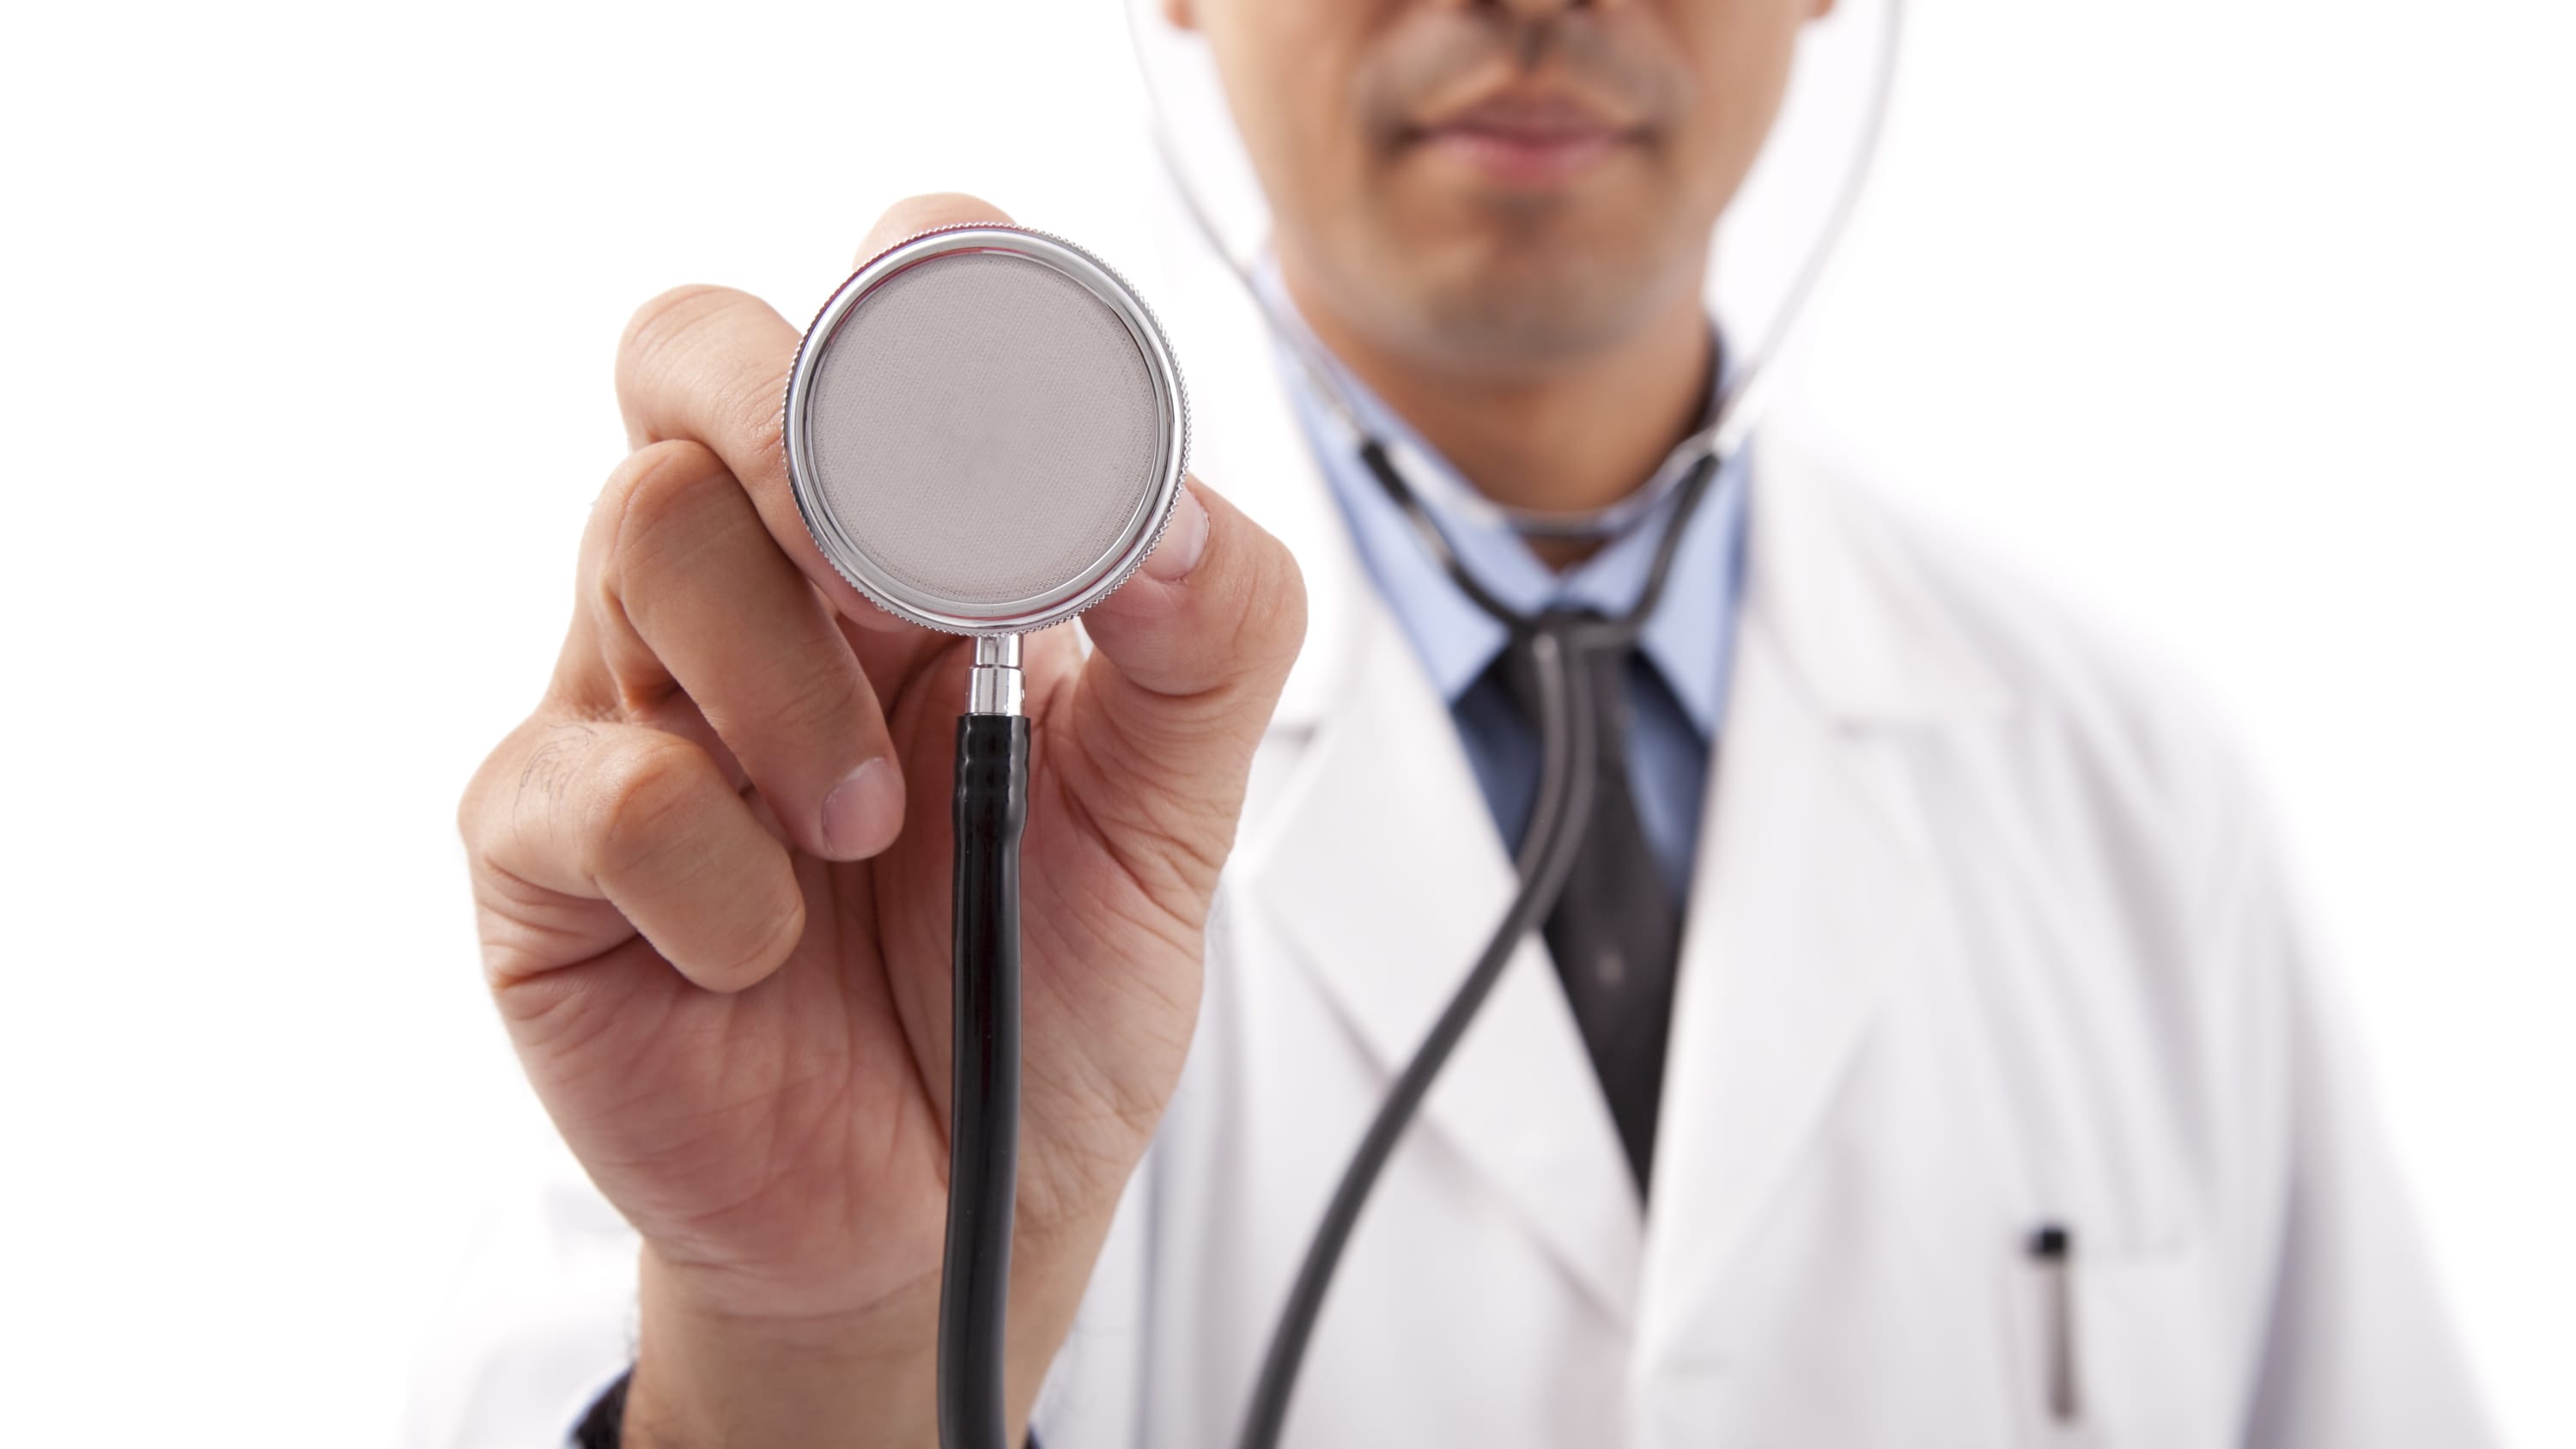 A doctor holds up a stethoscope used to examine a patient who may have a cardiomyopathy.